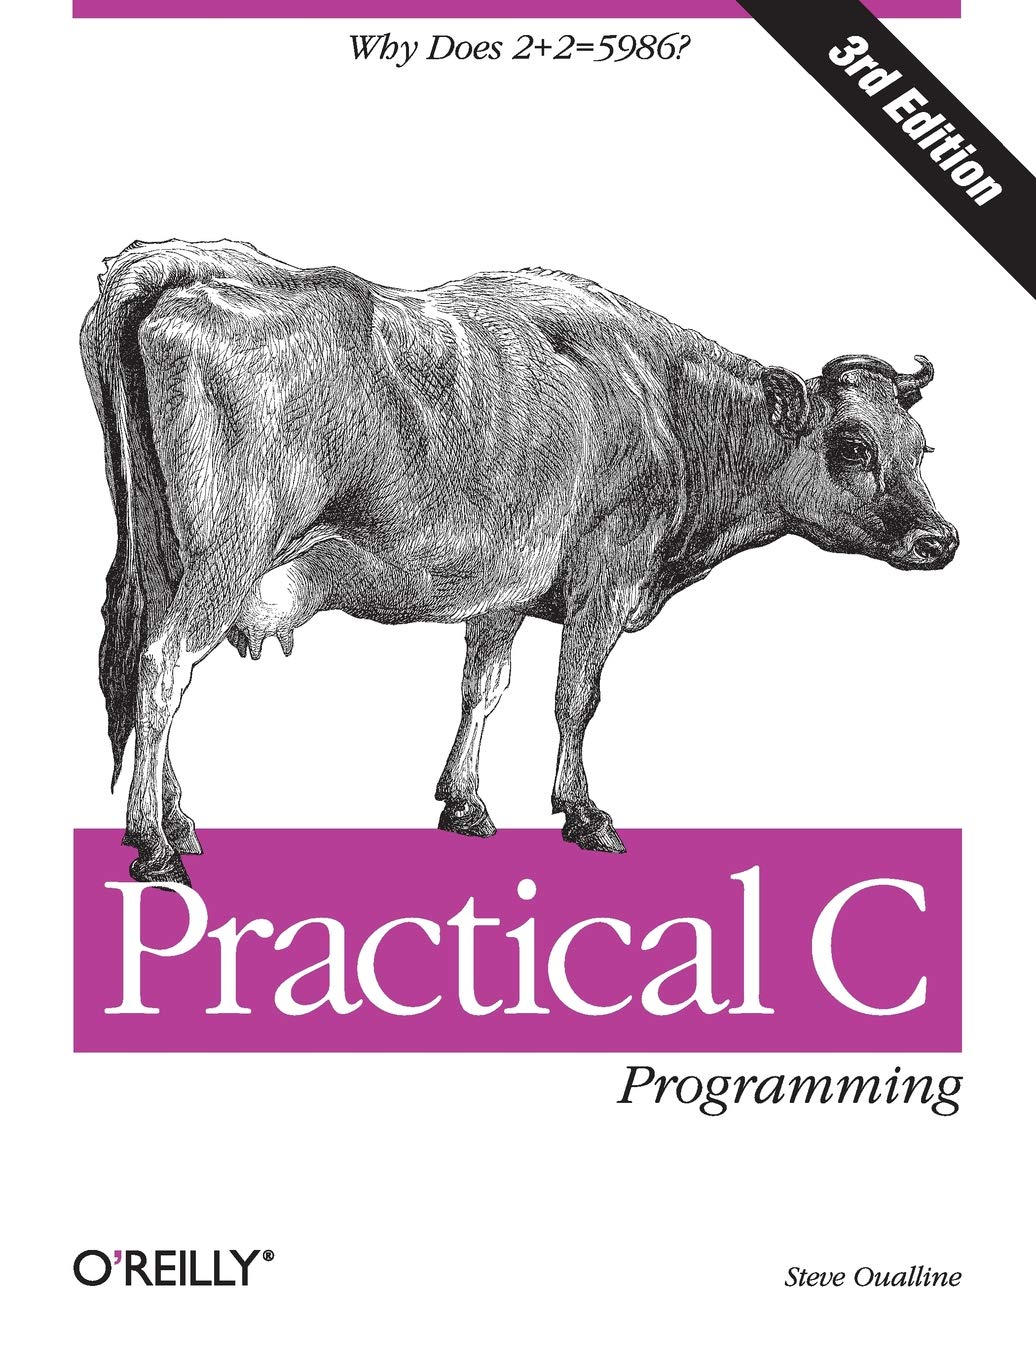 Book Cover Practical C Programming: Why Does 2+2 = 5986? (Nutshell Handbooks)